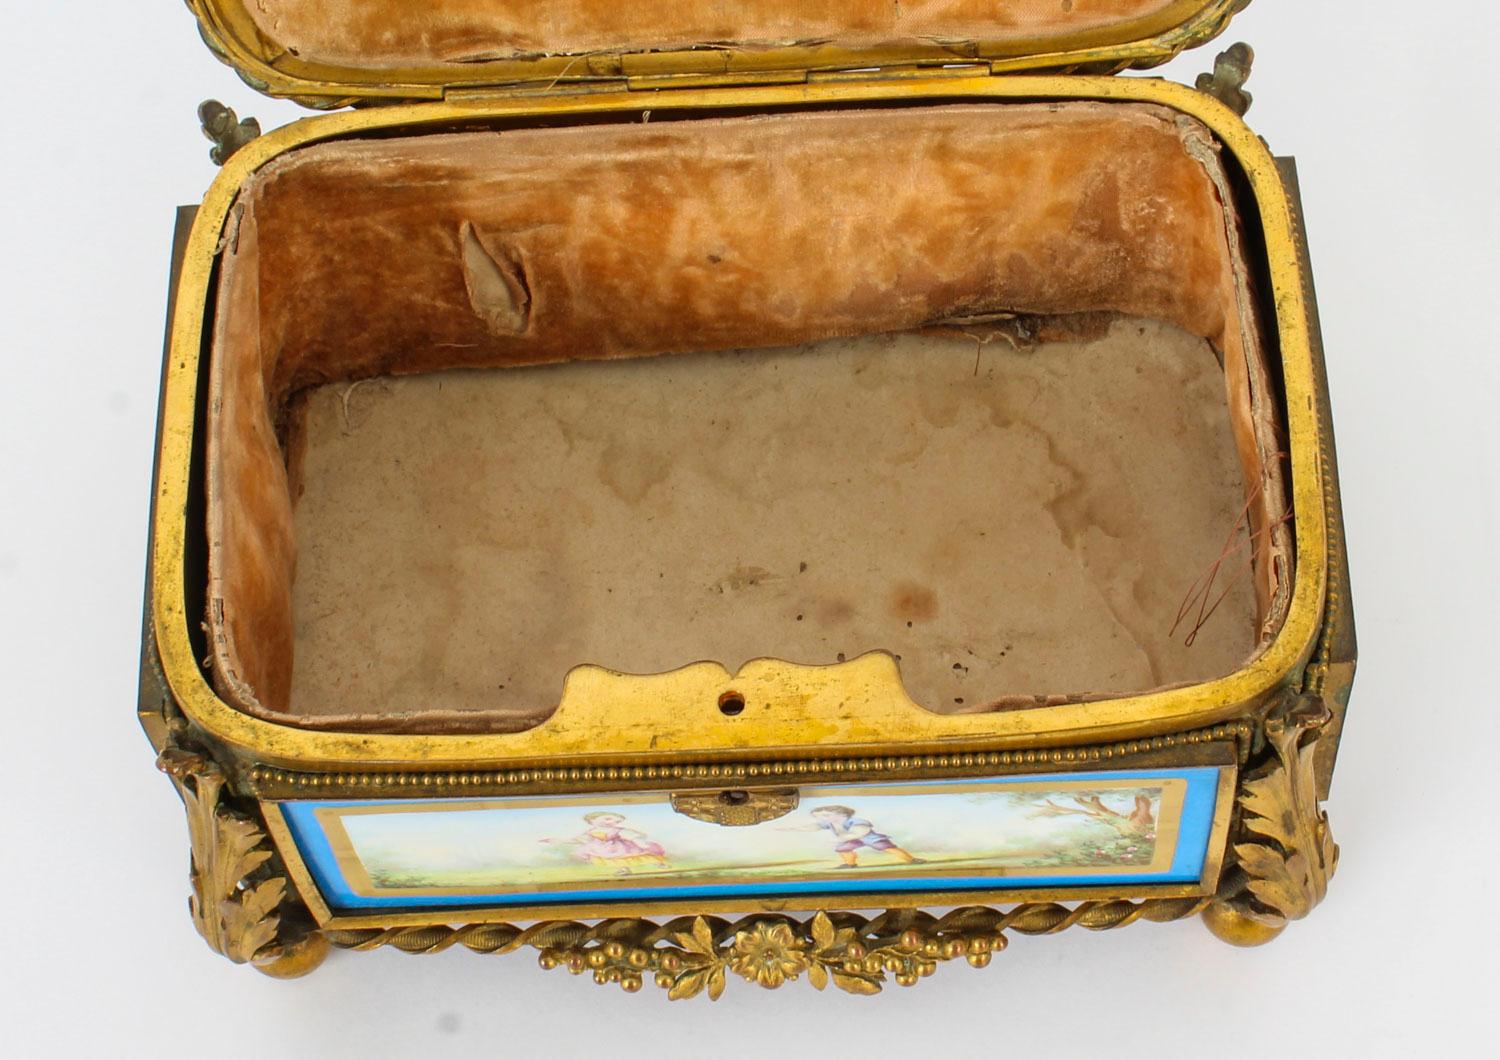 Antique French Sevres Porcelain and Ormolu Jewellery Casket 19th Century  For Sale 12